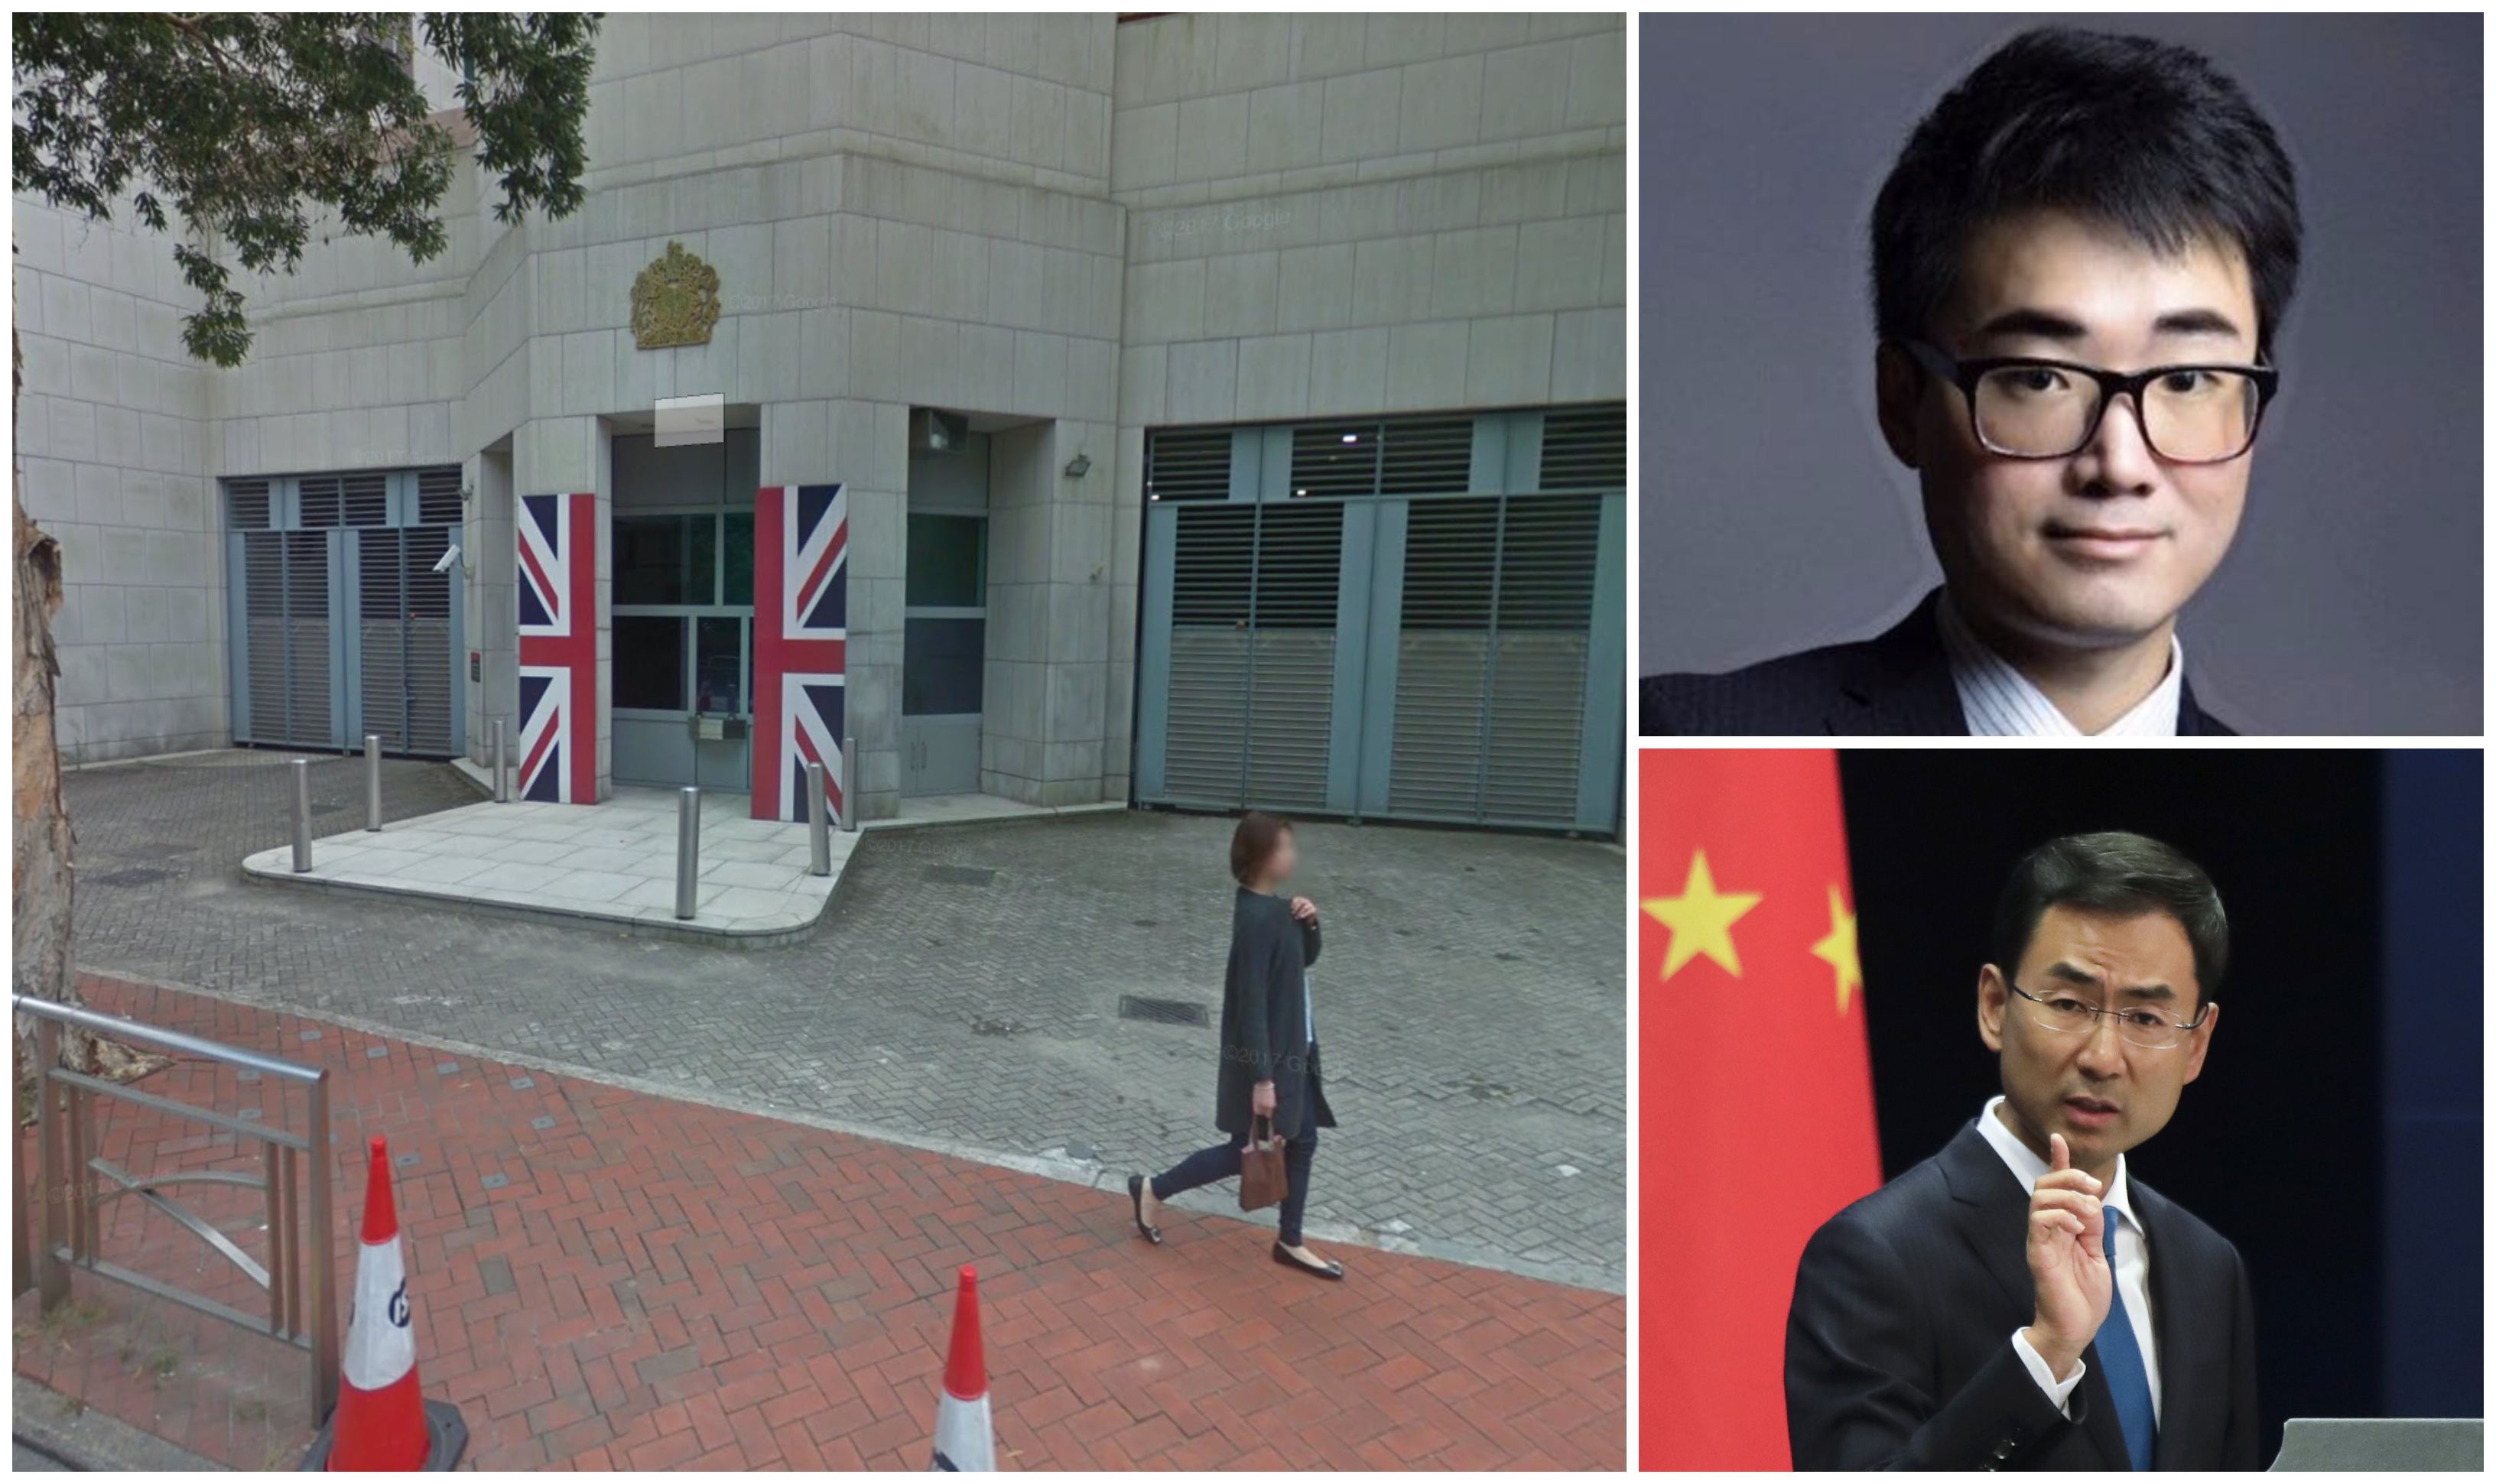 Clockwise from left: The UK consulate in Hong Kong; consulate staffer Simon Cheng, who is being detained in China; and Chinese Foreign Ministry spokesman Geng Shuang, who confirmed Cheng’s detention. Photos via Google Maps/Facebook/VoA.